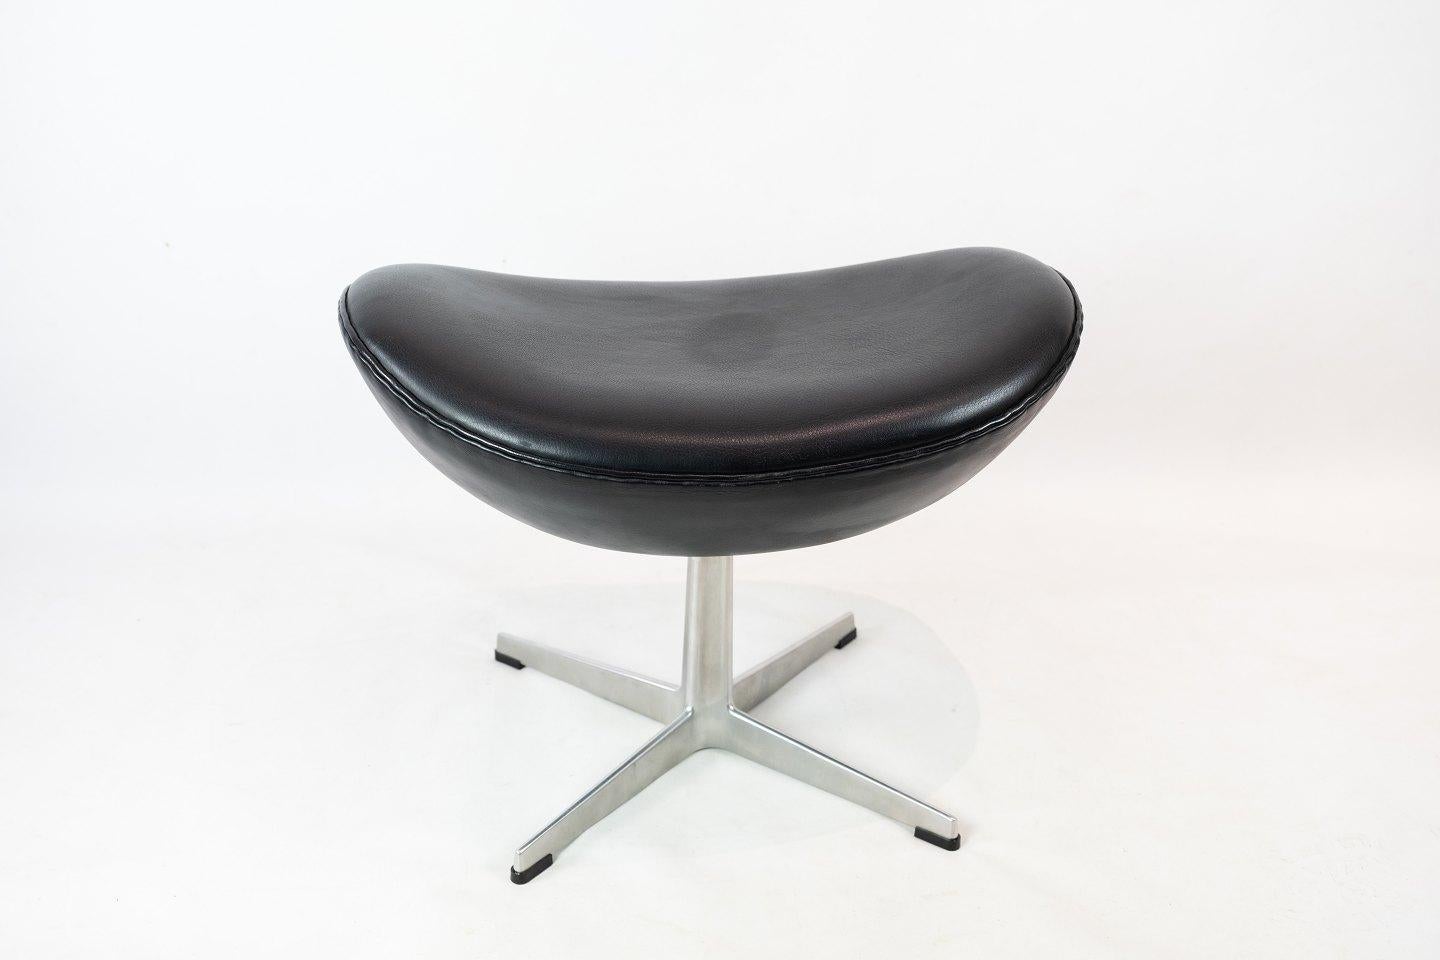 Stool for the egg, model 3127, designed by Arne Jacobsen in 1958 and manufactured by Fritz Hansen. The stool is originally upholstered with black leather and in great vintage condition.
   